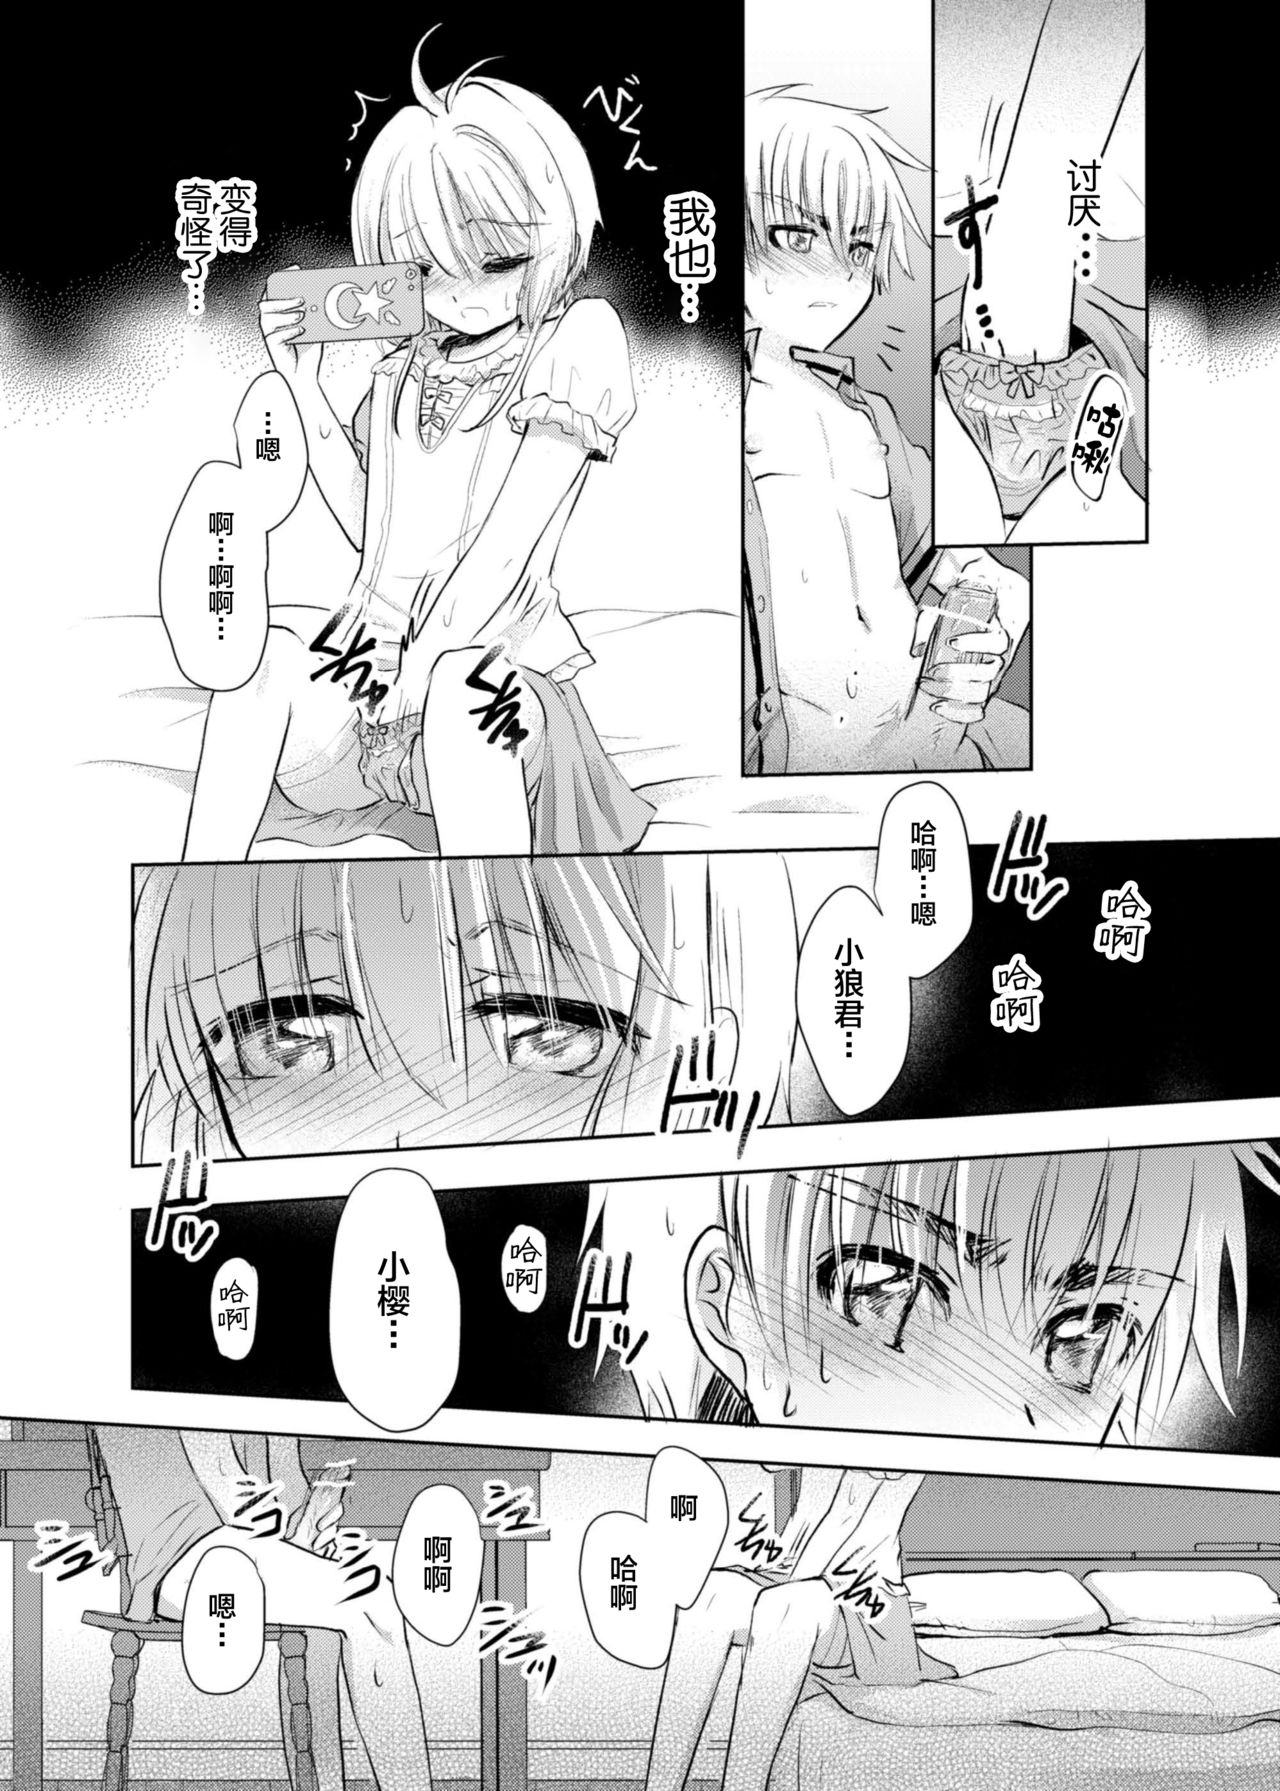 [Maple of Forest (Kaede Sago)] Give and Take (Cardcaptor Sakura) [Chinese] [新桥月白日语社] [Digital] page 19 full